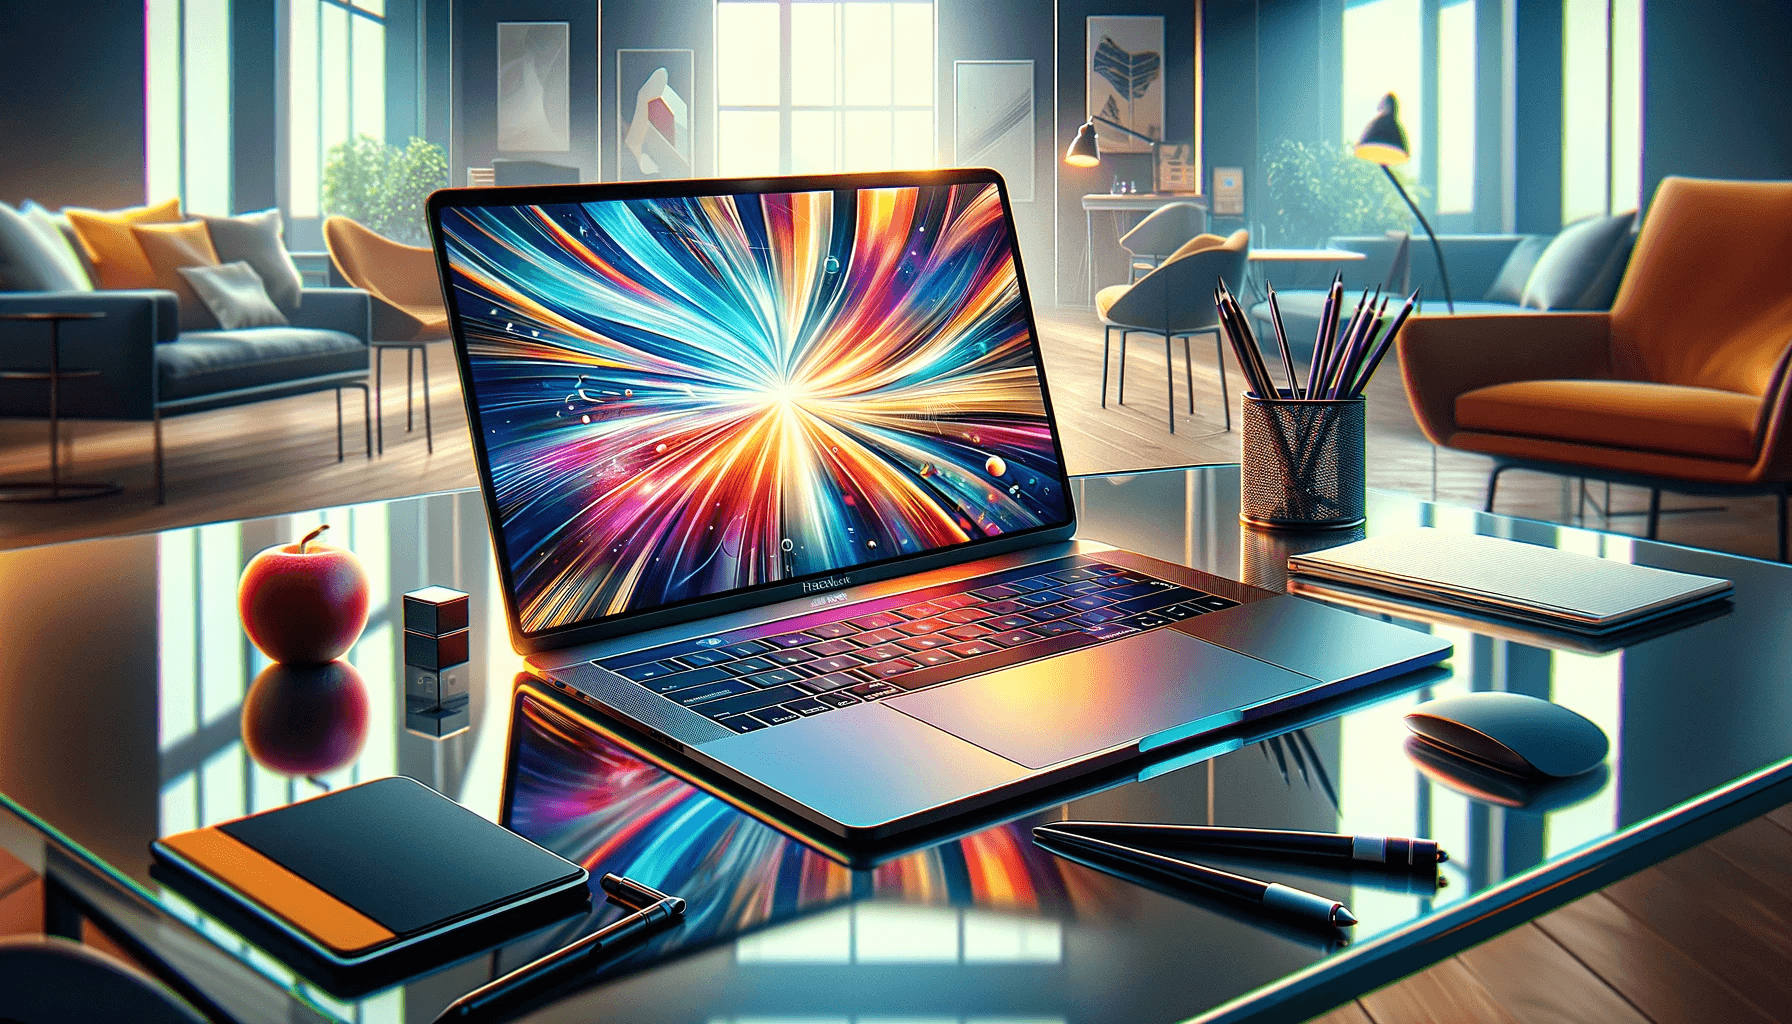 DALL·E 2023 11 22 17.10.43 A stunning digital illustration of a MacBook in a vibrant and artistic style. The MacBook is shown open on a modern glass table displaying its sleek